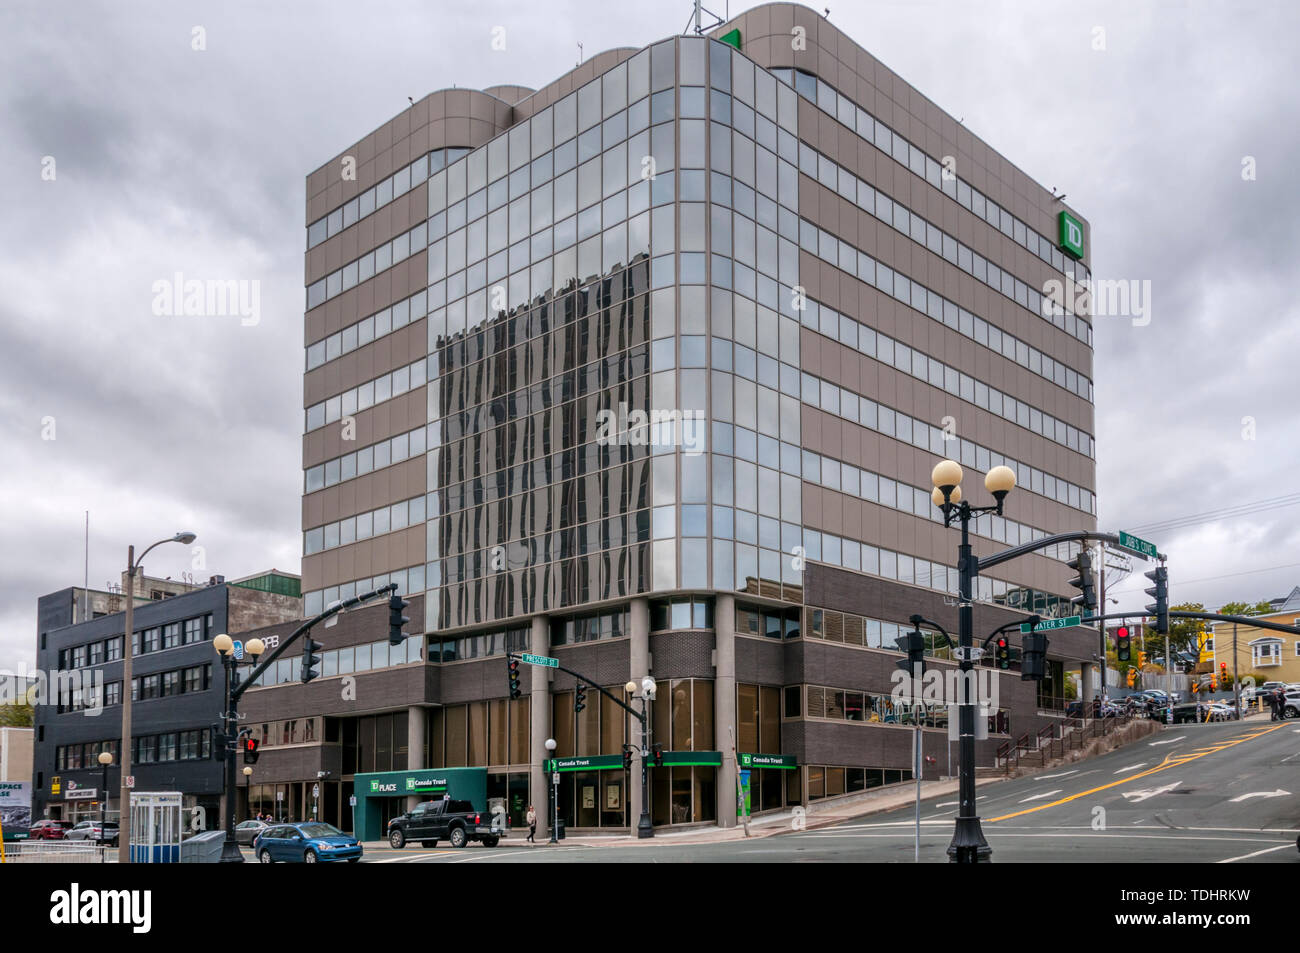 The Canada Trust building on the corner of Prescott Street and Water Street in St John's, Newfoundland. Now part of Toronto-Dominion Bank. Stock Photo